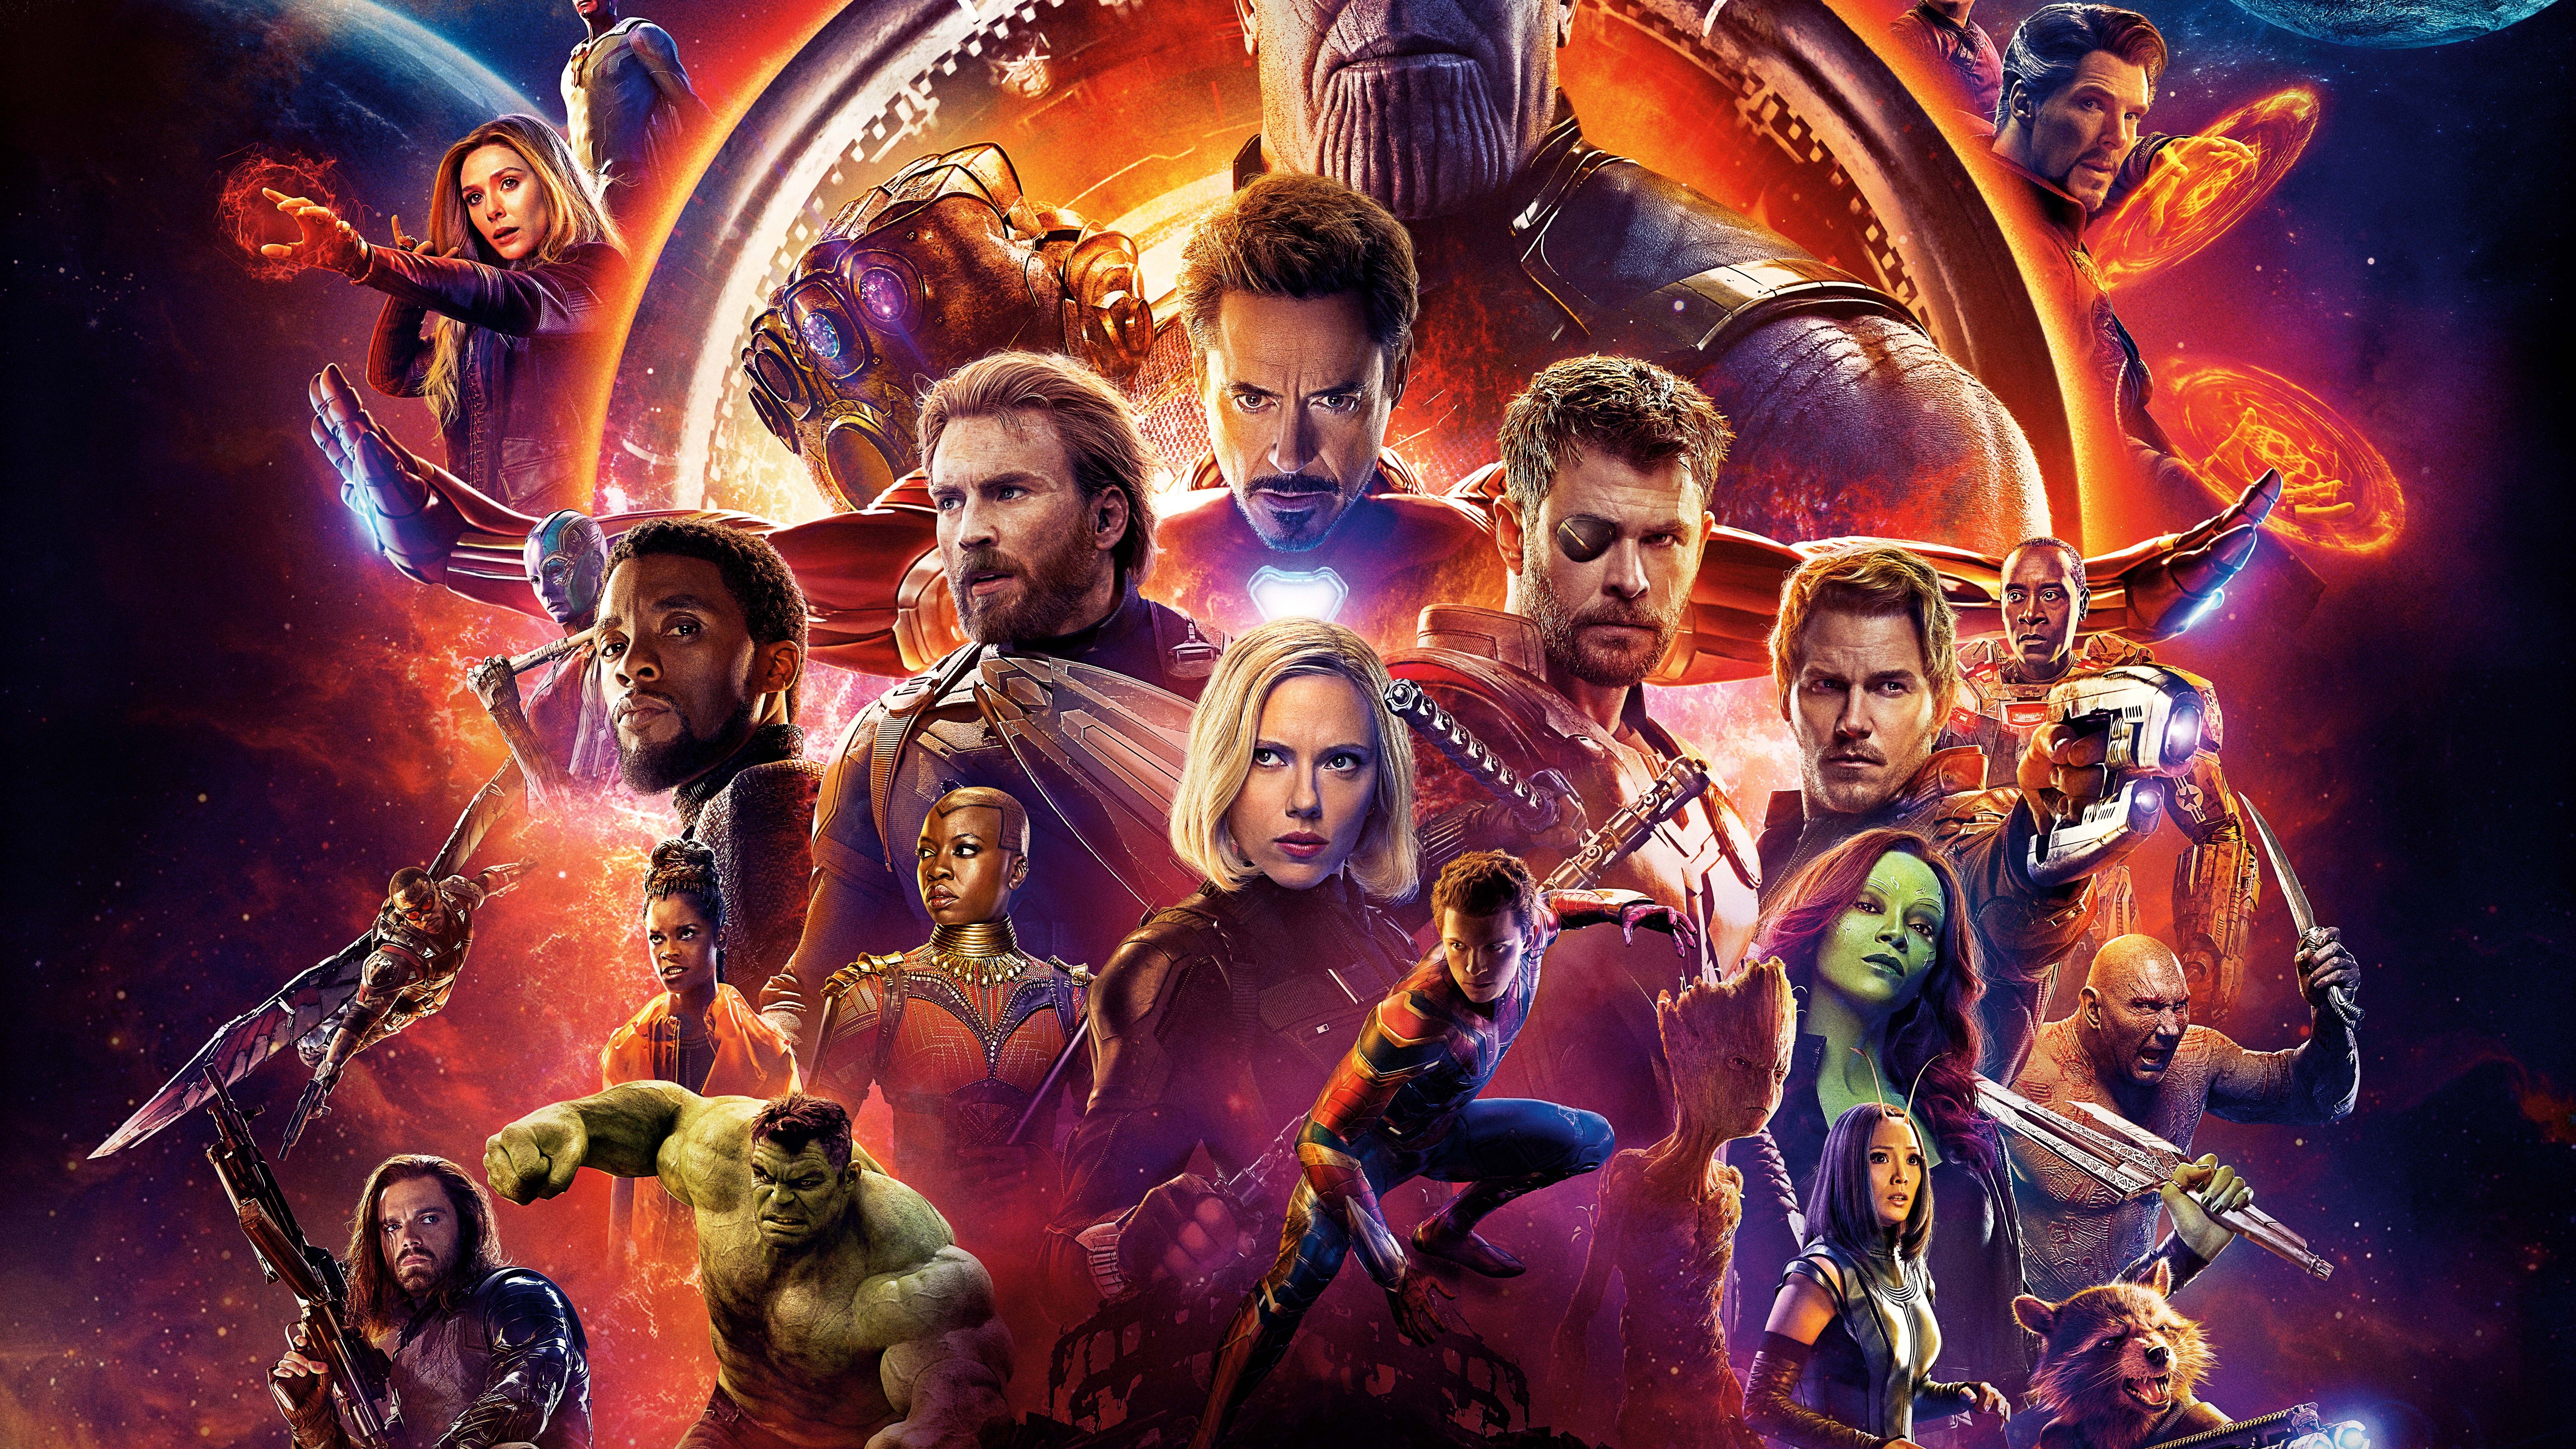 7680x4320 Avengers Infinity War 2018 10k Poster 8k HD 4k Wallpapers, Image, Backgrounds, Photos and Pictures